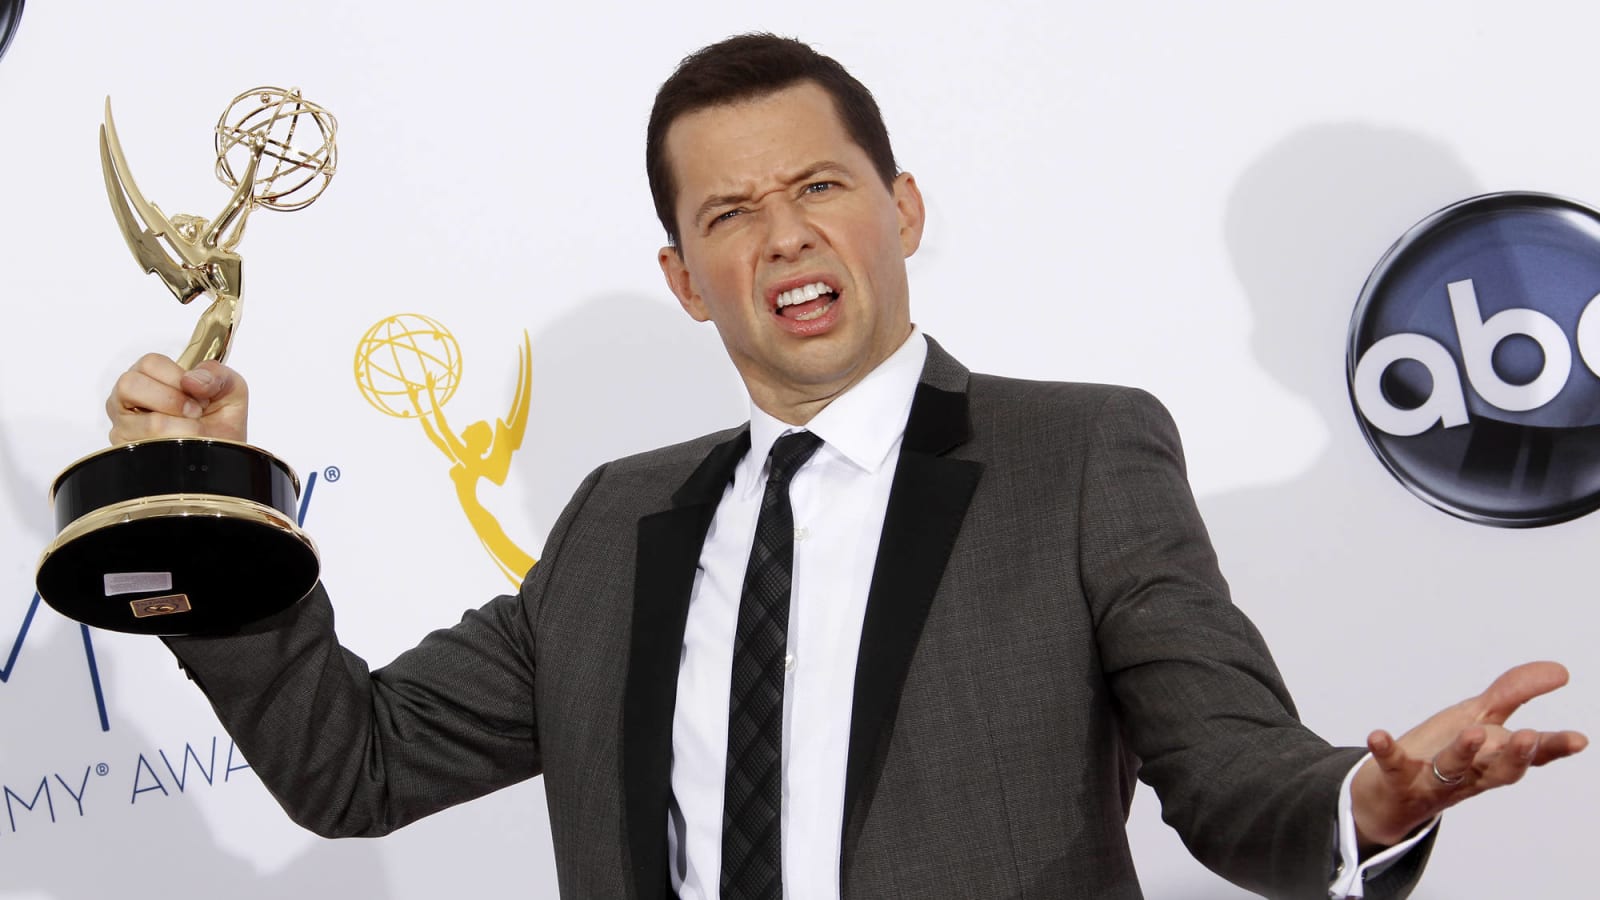 25 times the Emmys got it wrong